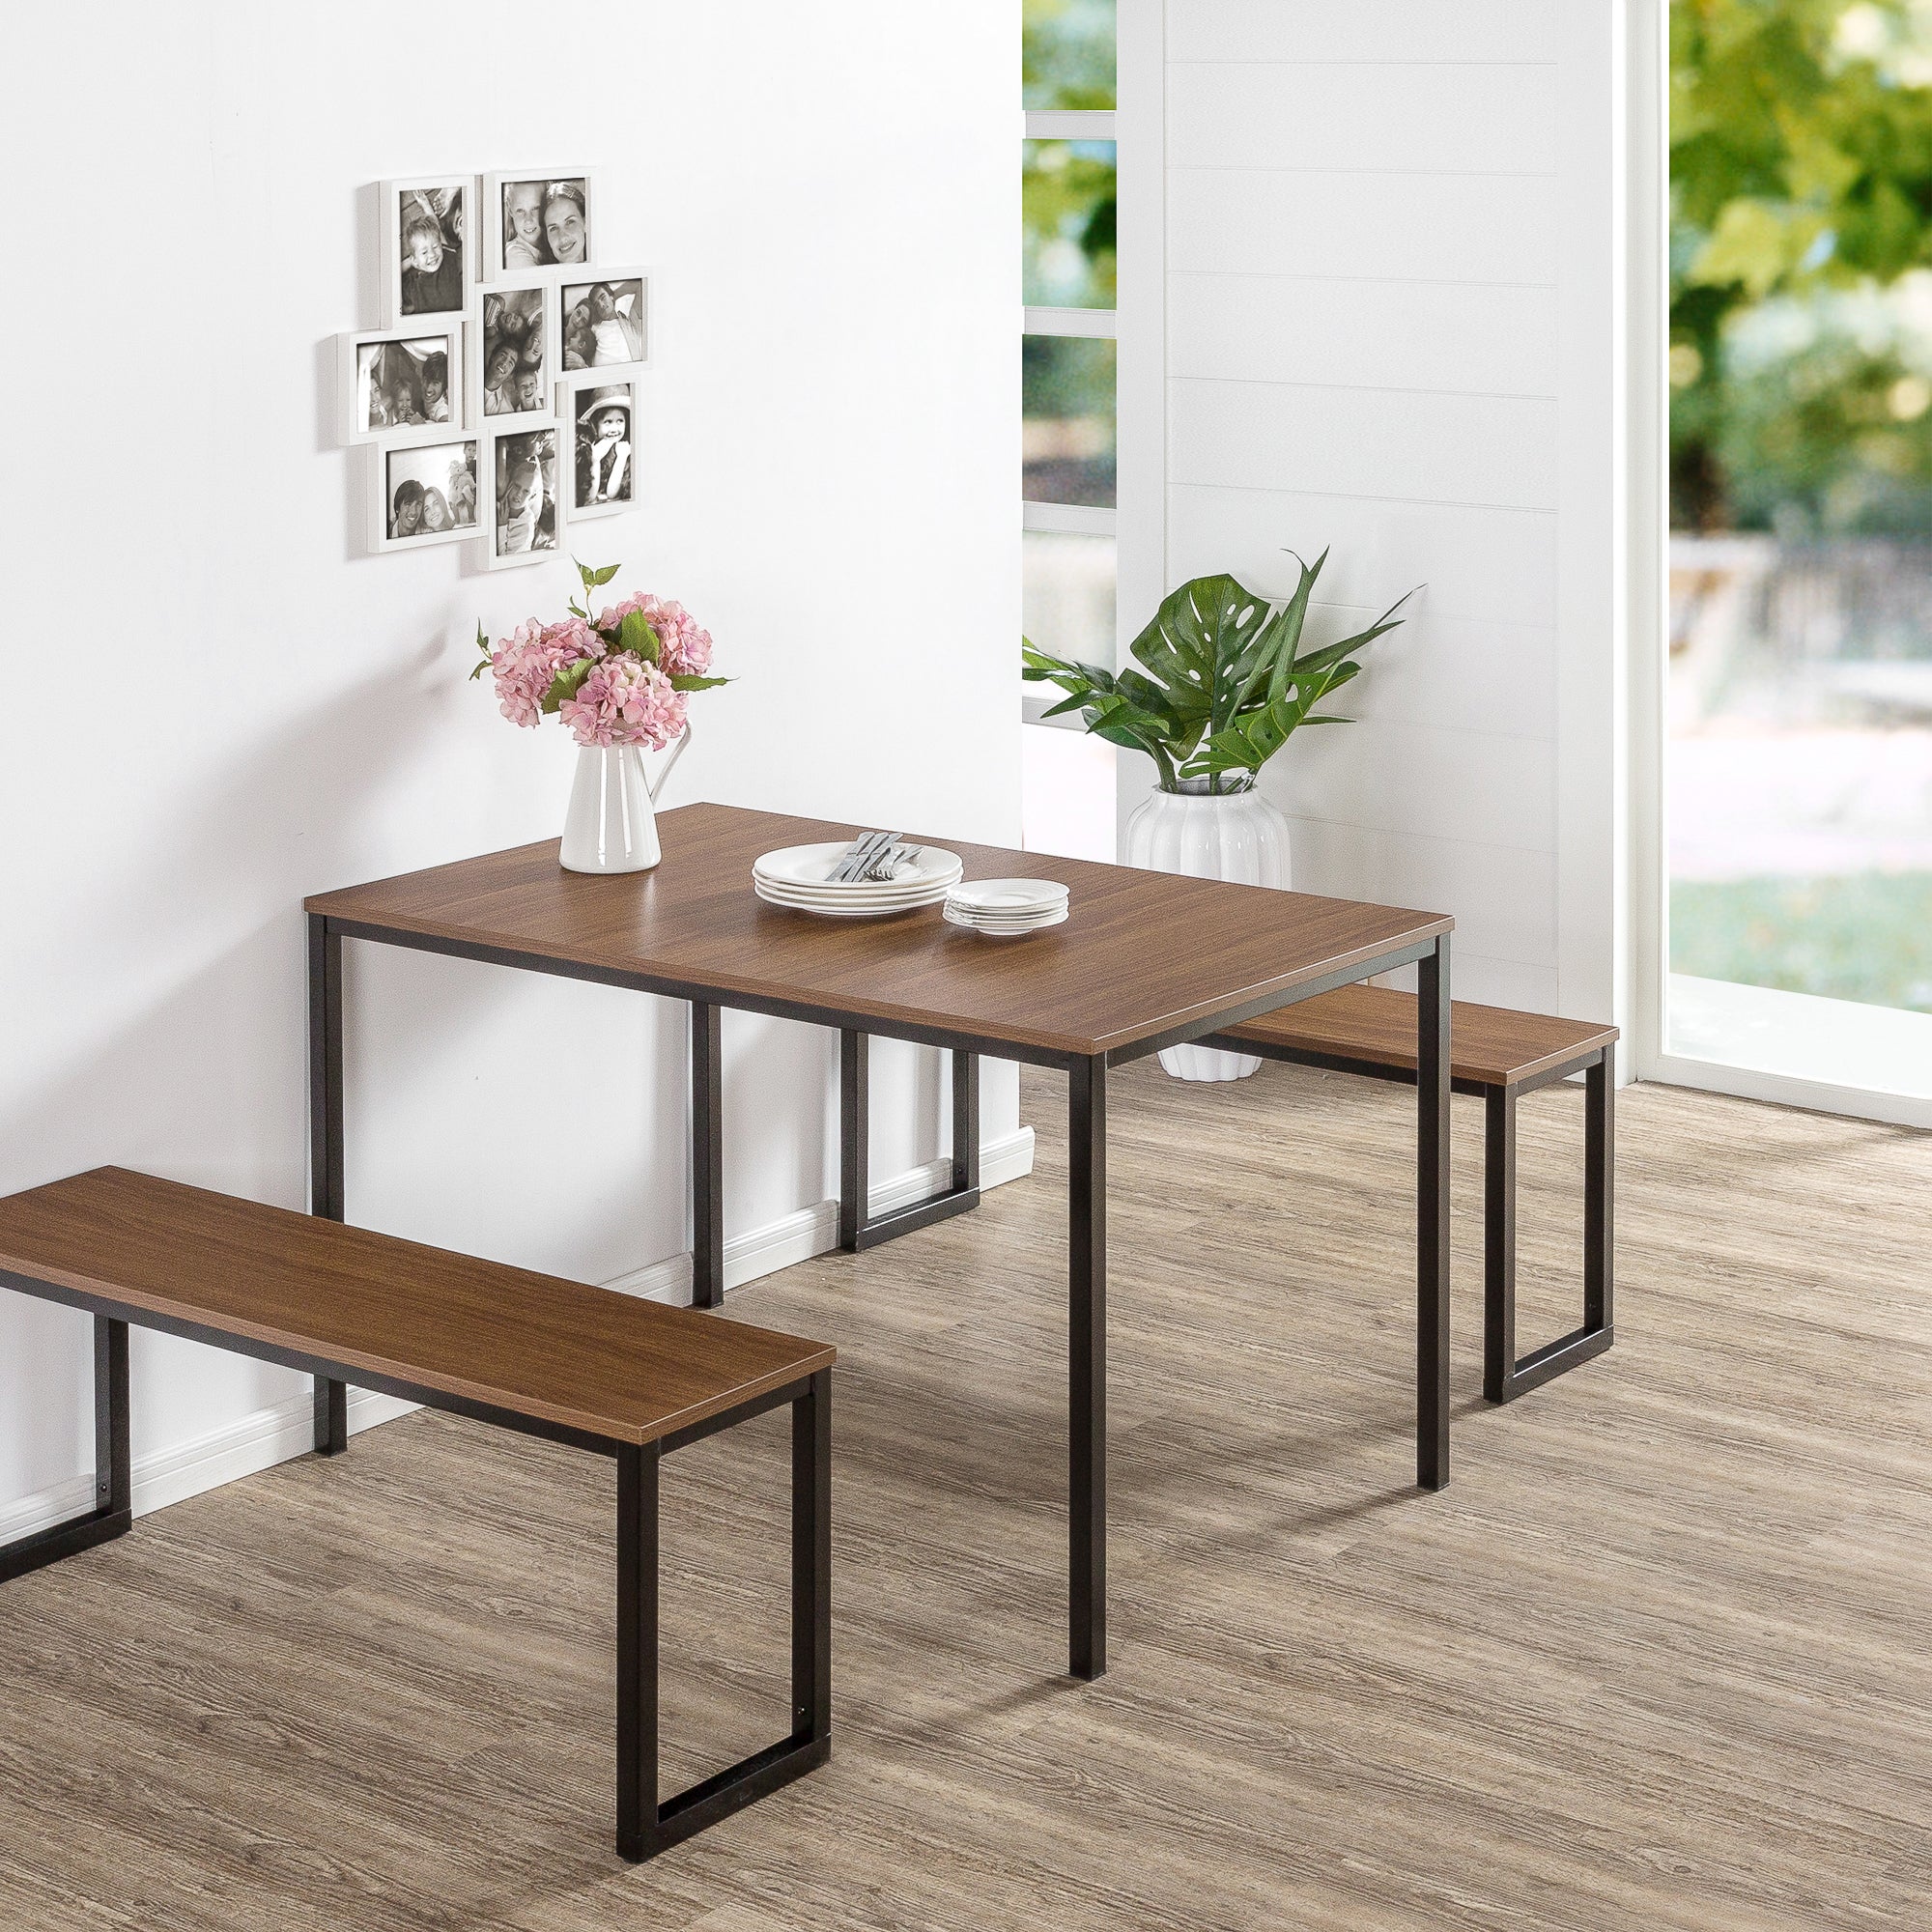 Zinus Louis Modern Studio Soho Dining Table with Two Benches - 3 Pieces Dining Table Set - Brown